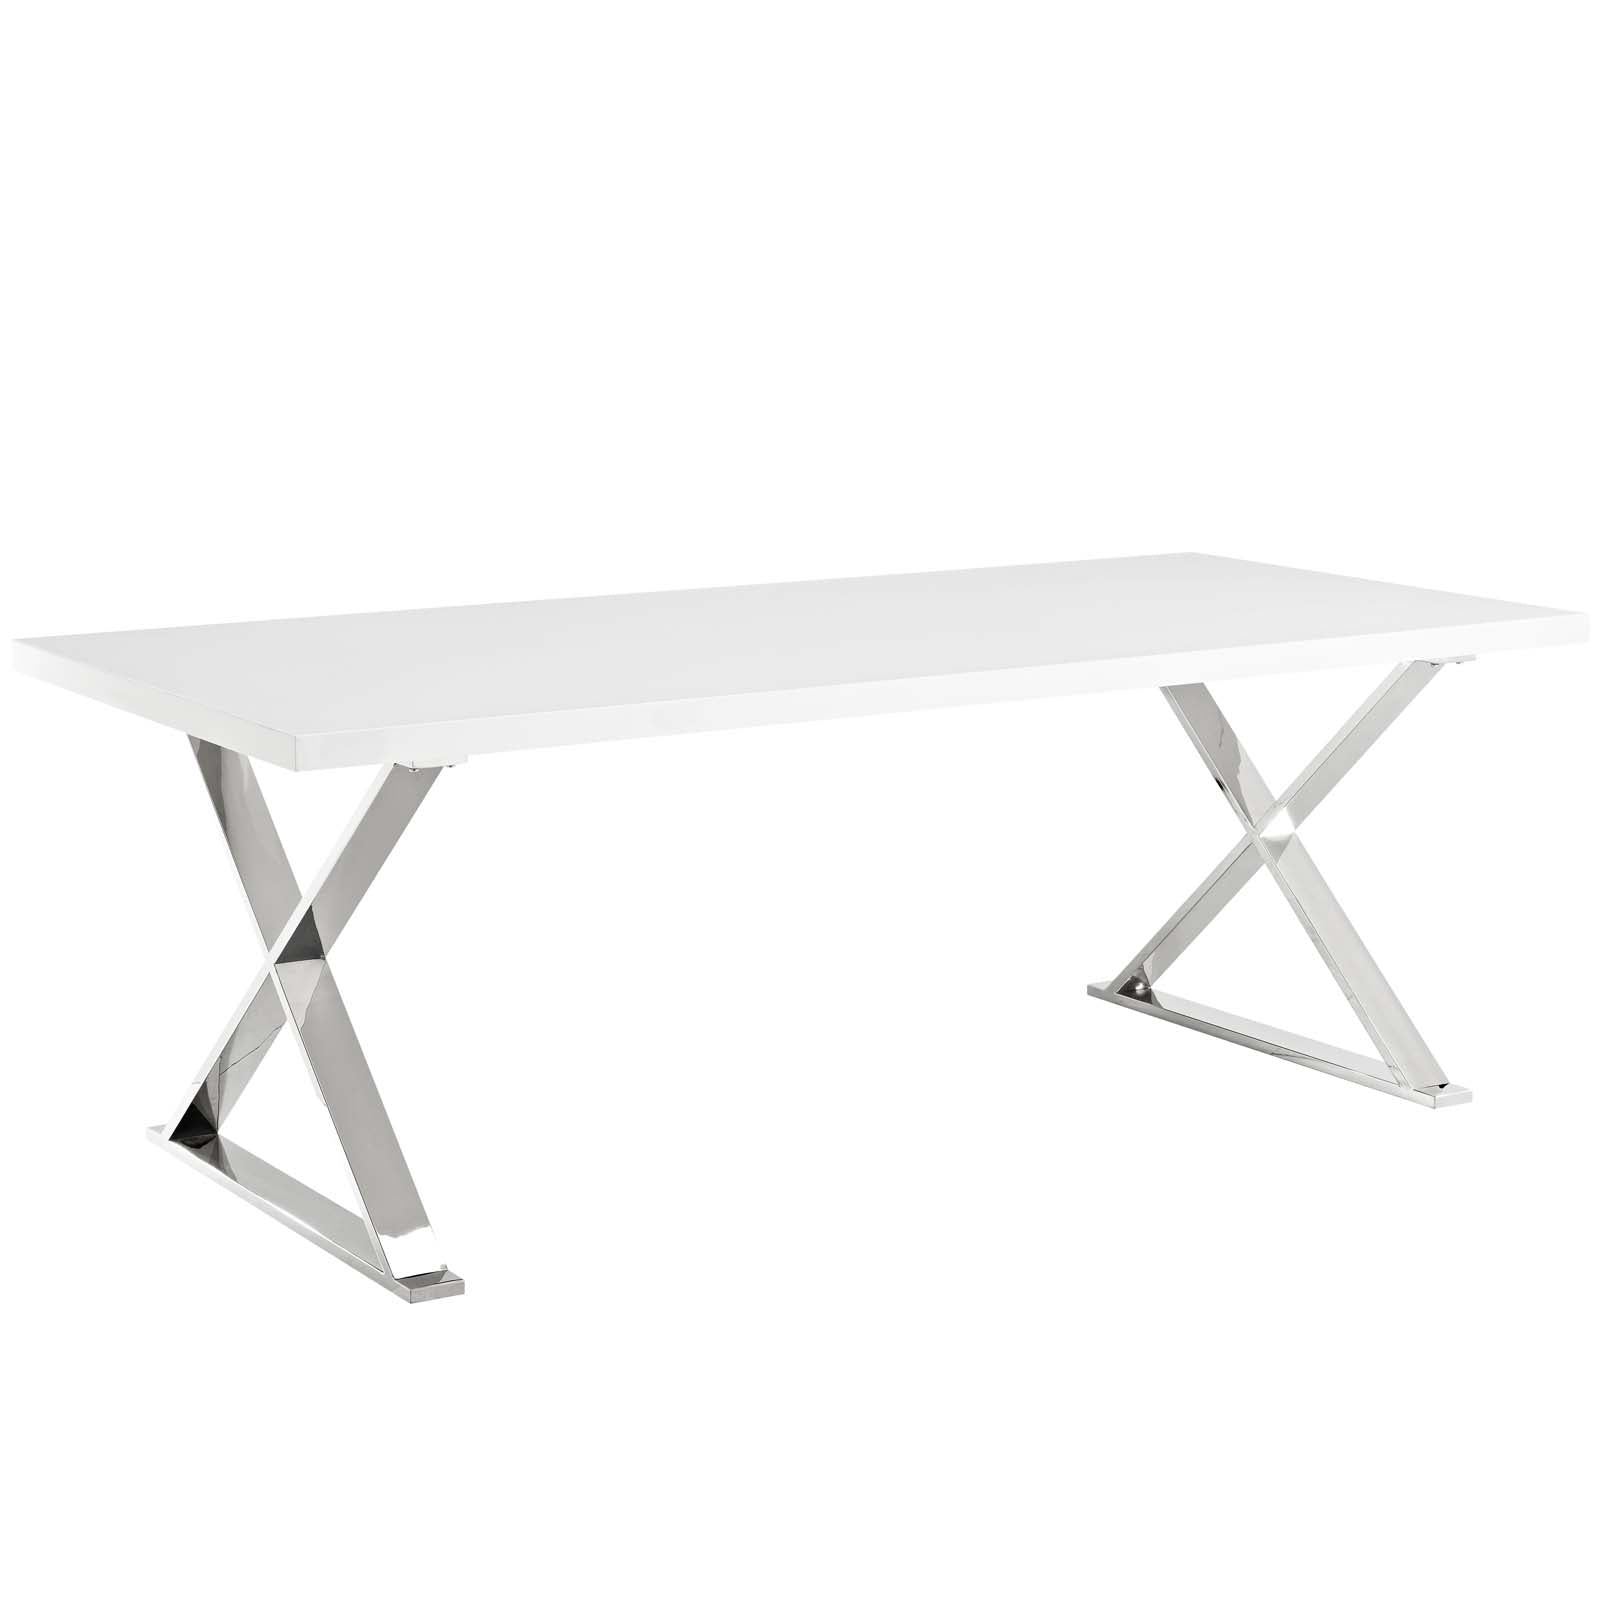 Modern Sector Dining Table - Stainless Steel X base - 30" H Dining Room Table